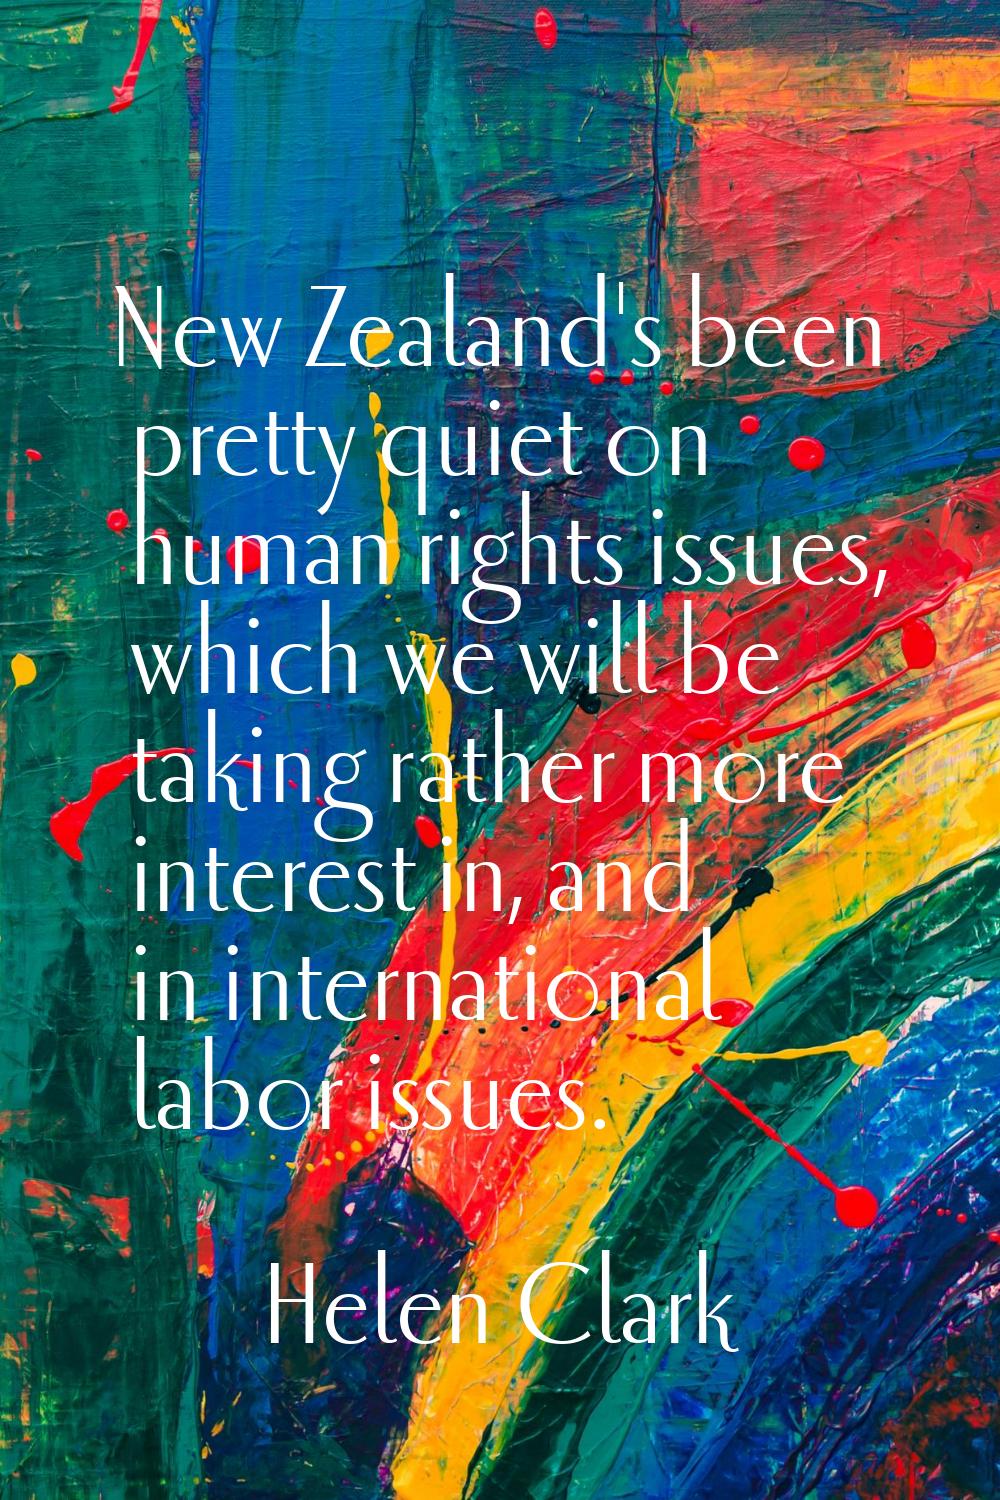 New Zealand's been pretty quiet on human rights issues, which we will be taking rather more interes